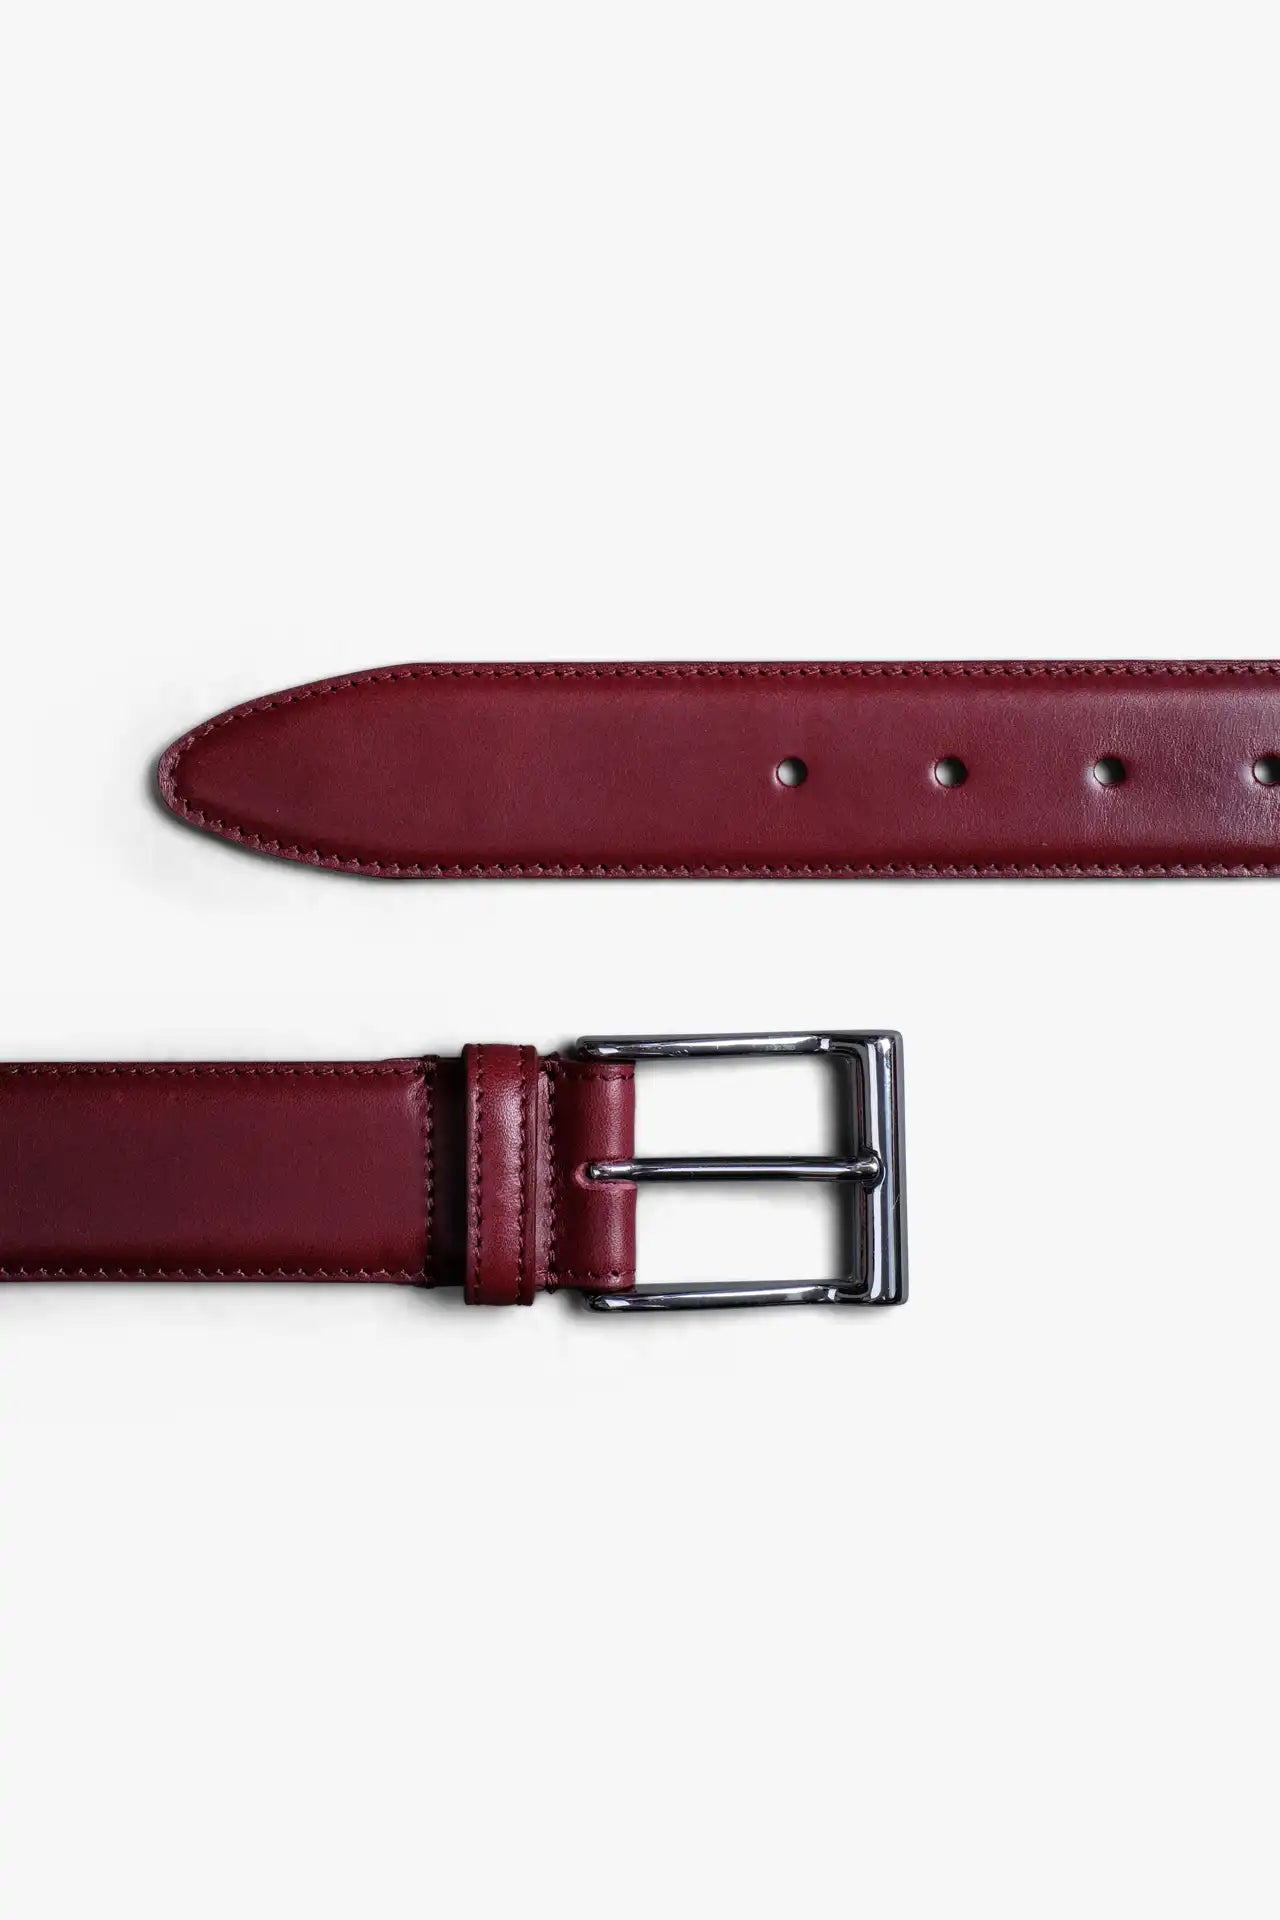 Rosewood Red Leather Belt in minimalist design, Made in Italy from vegetable tanned leather. Perfect to match with hand made dress shoes. 